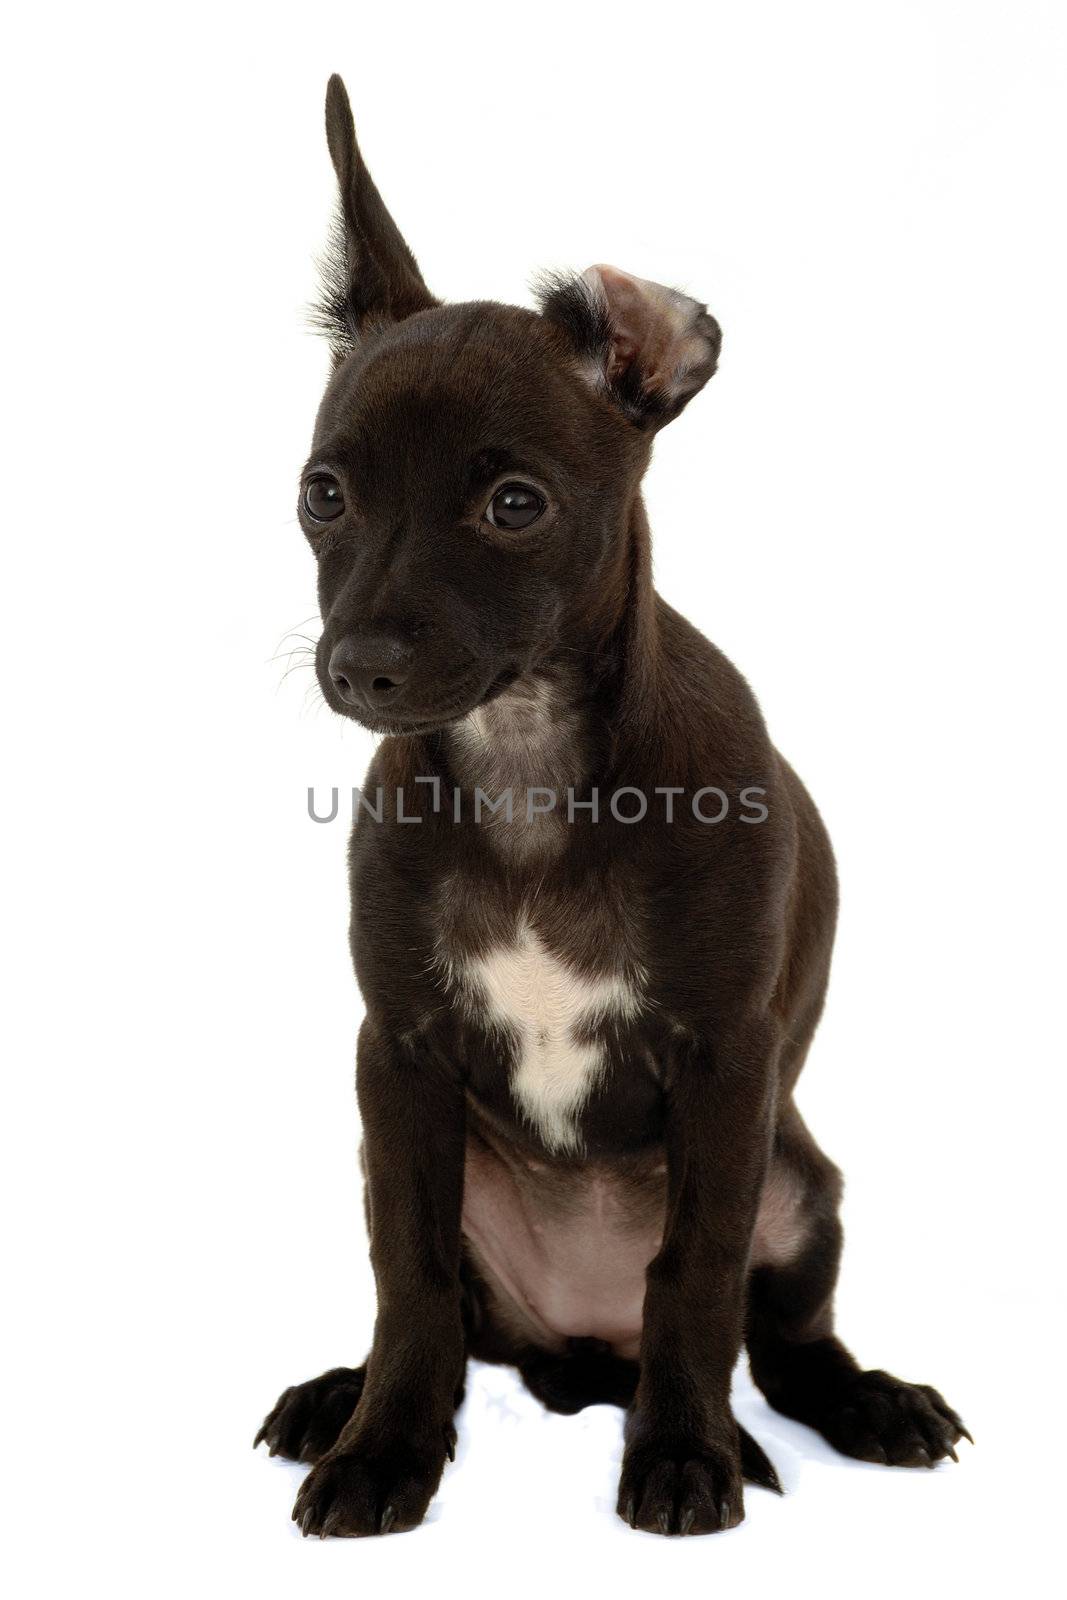 Sweet puppy dog on a clean white background.
Mix of a miniature pincher and a chihuahua.
